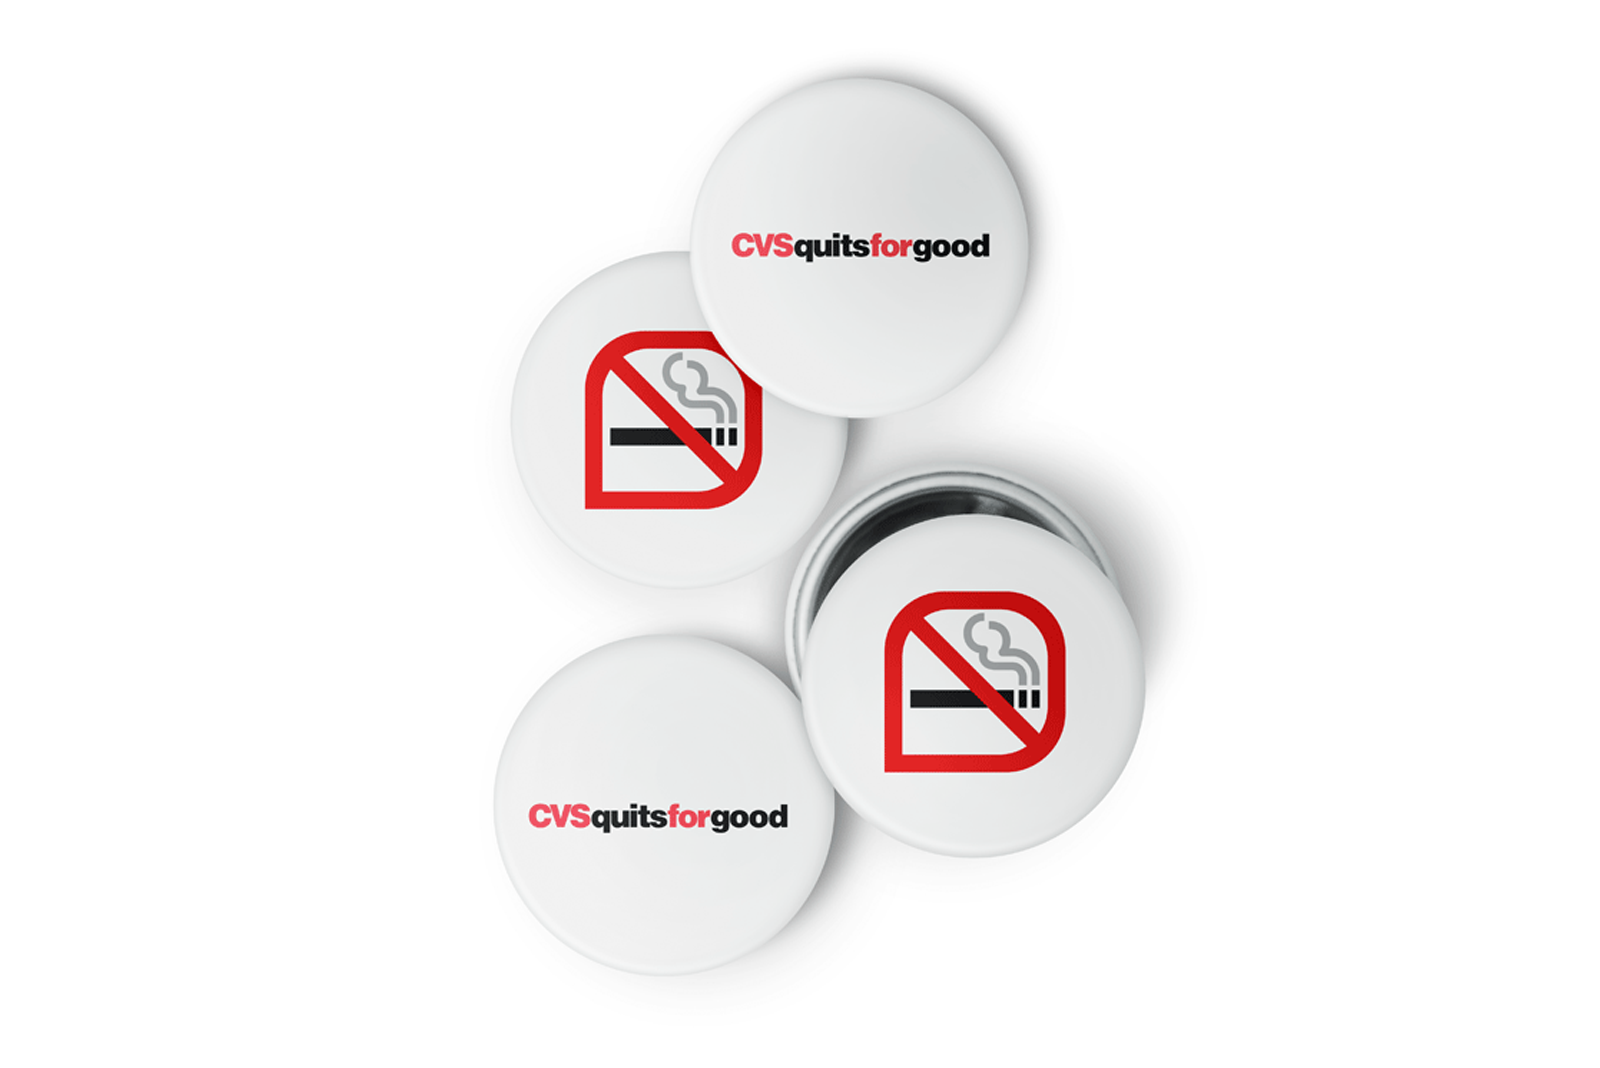 buttons with CVS quits for good slogan and anti-tobacco logos